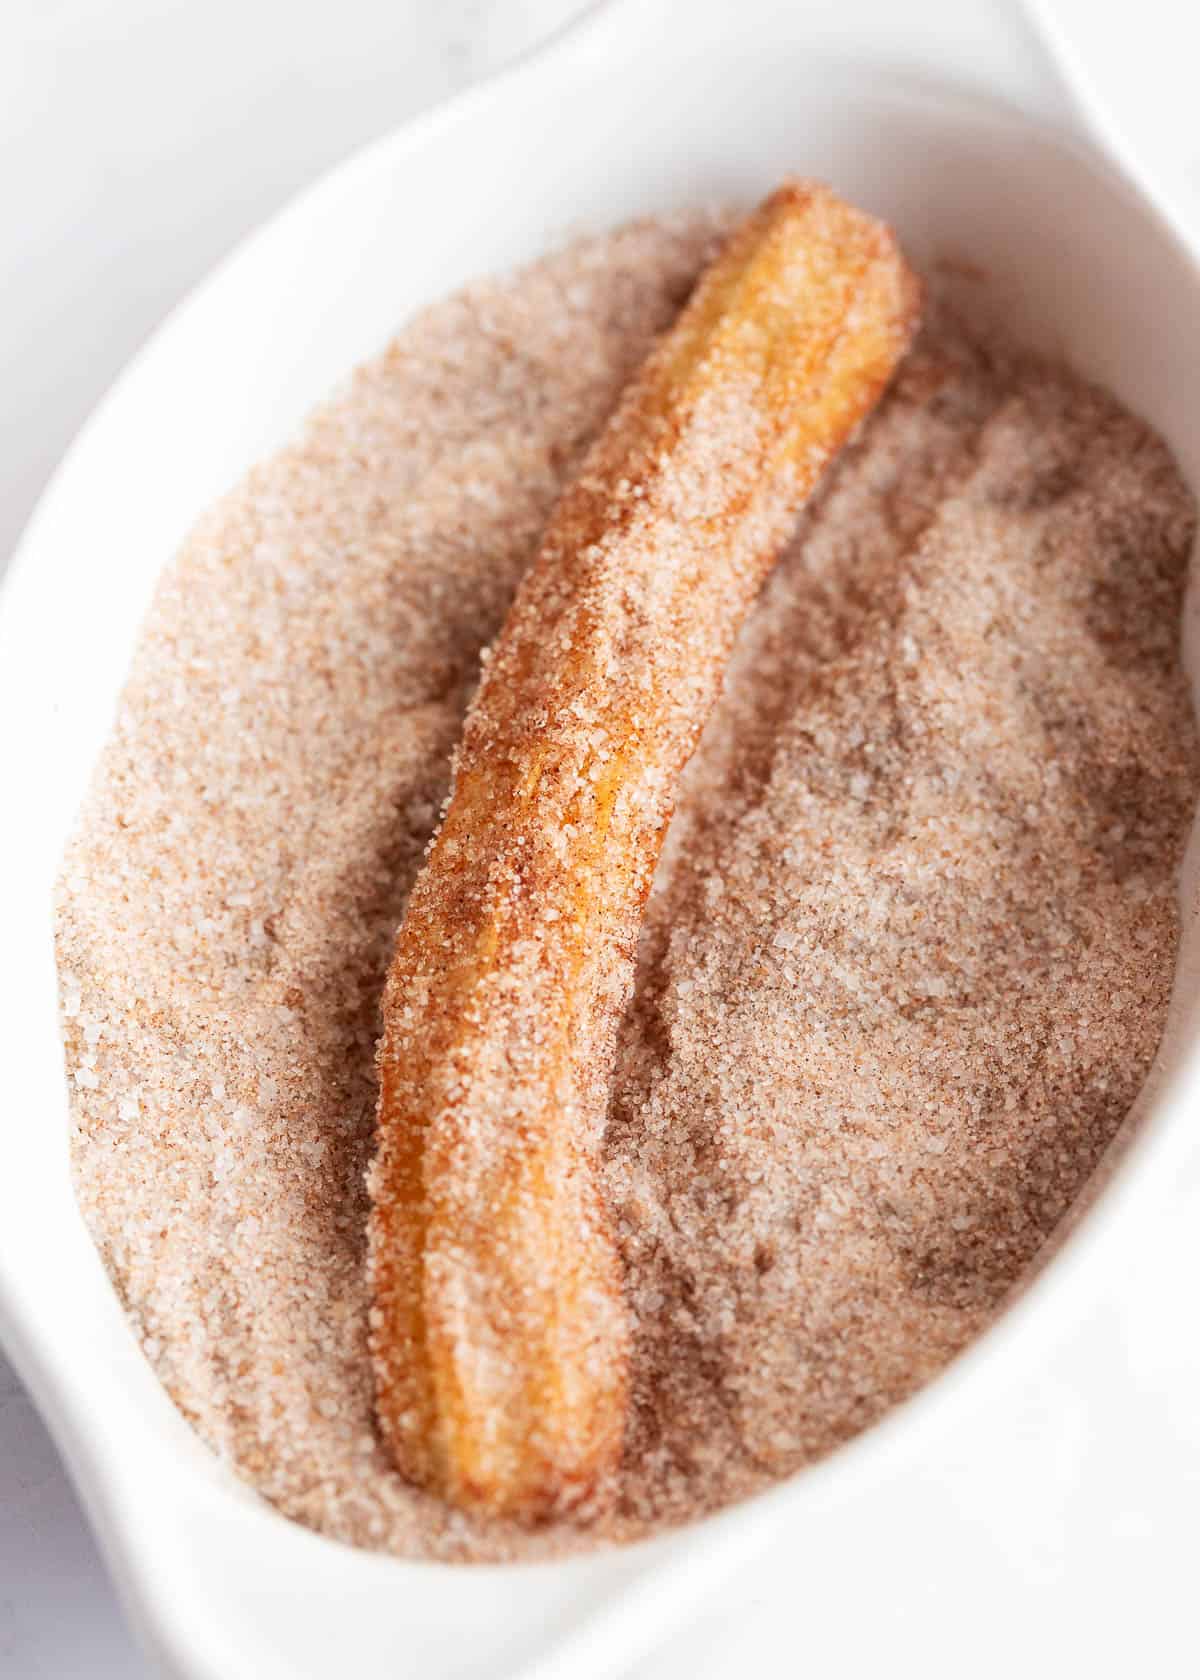 Churro being dipped in cinnamon.